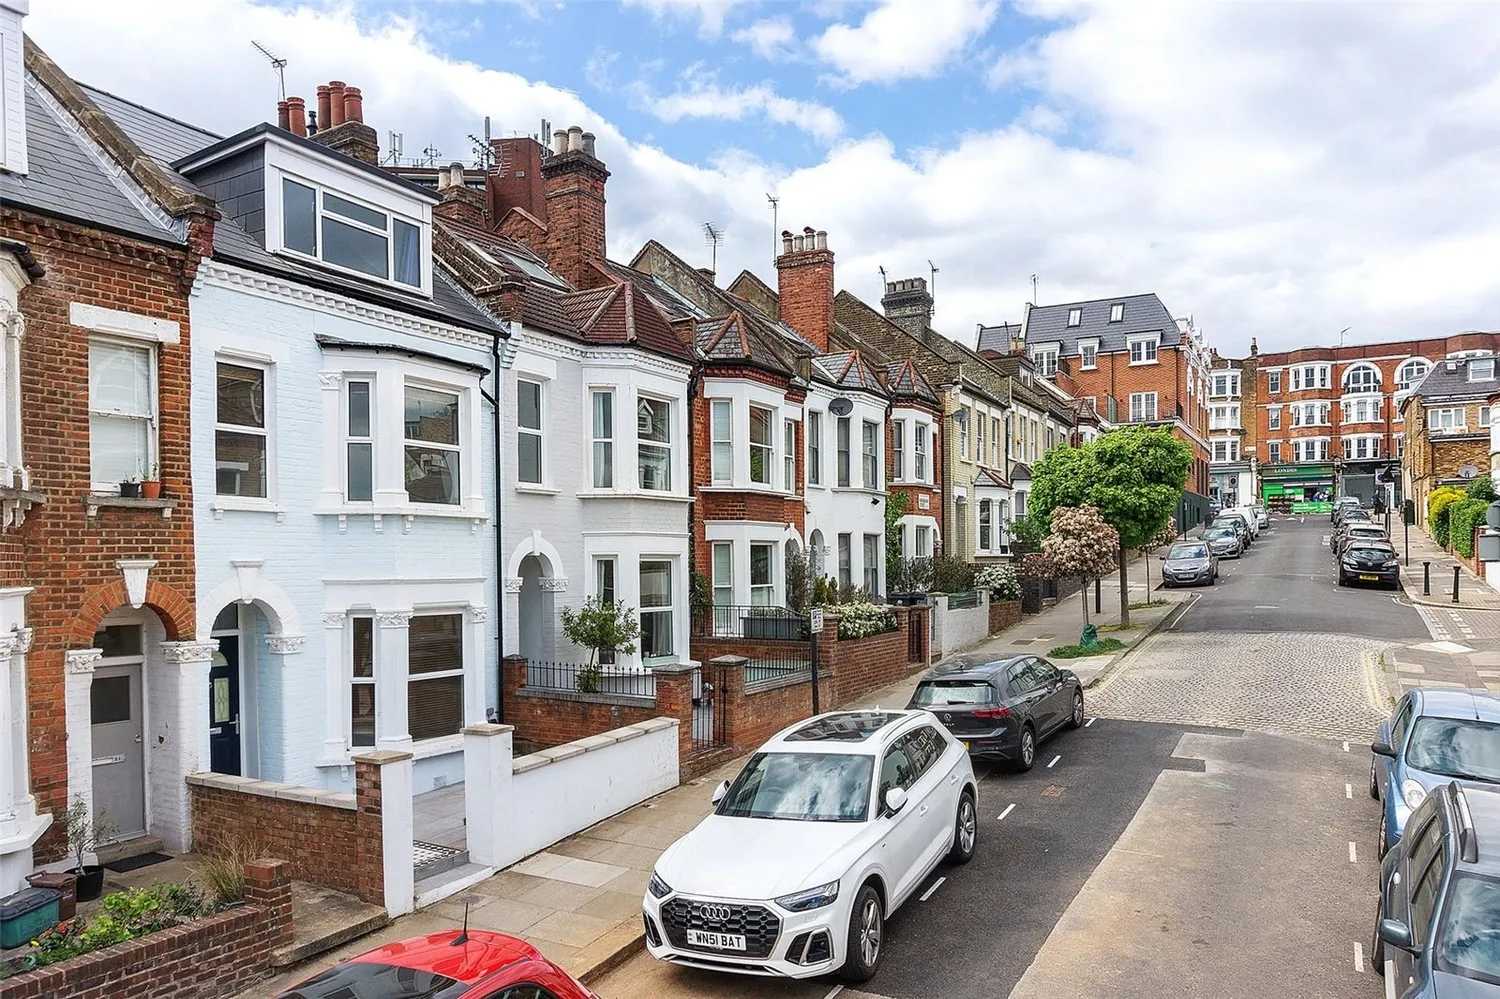 House in Hampstead, West End Lane 11526998